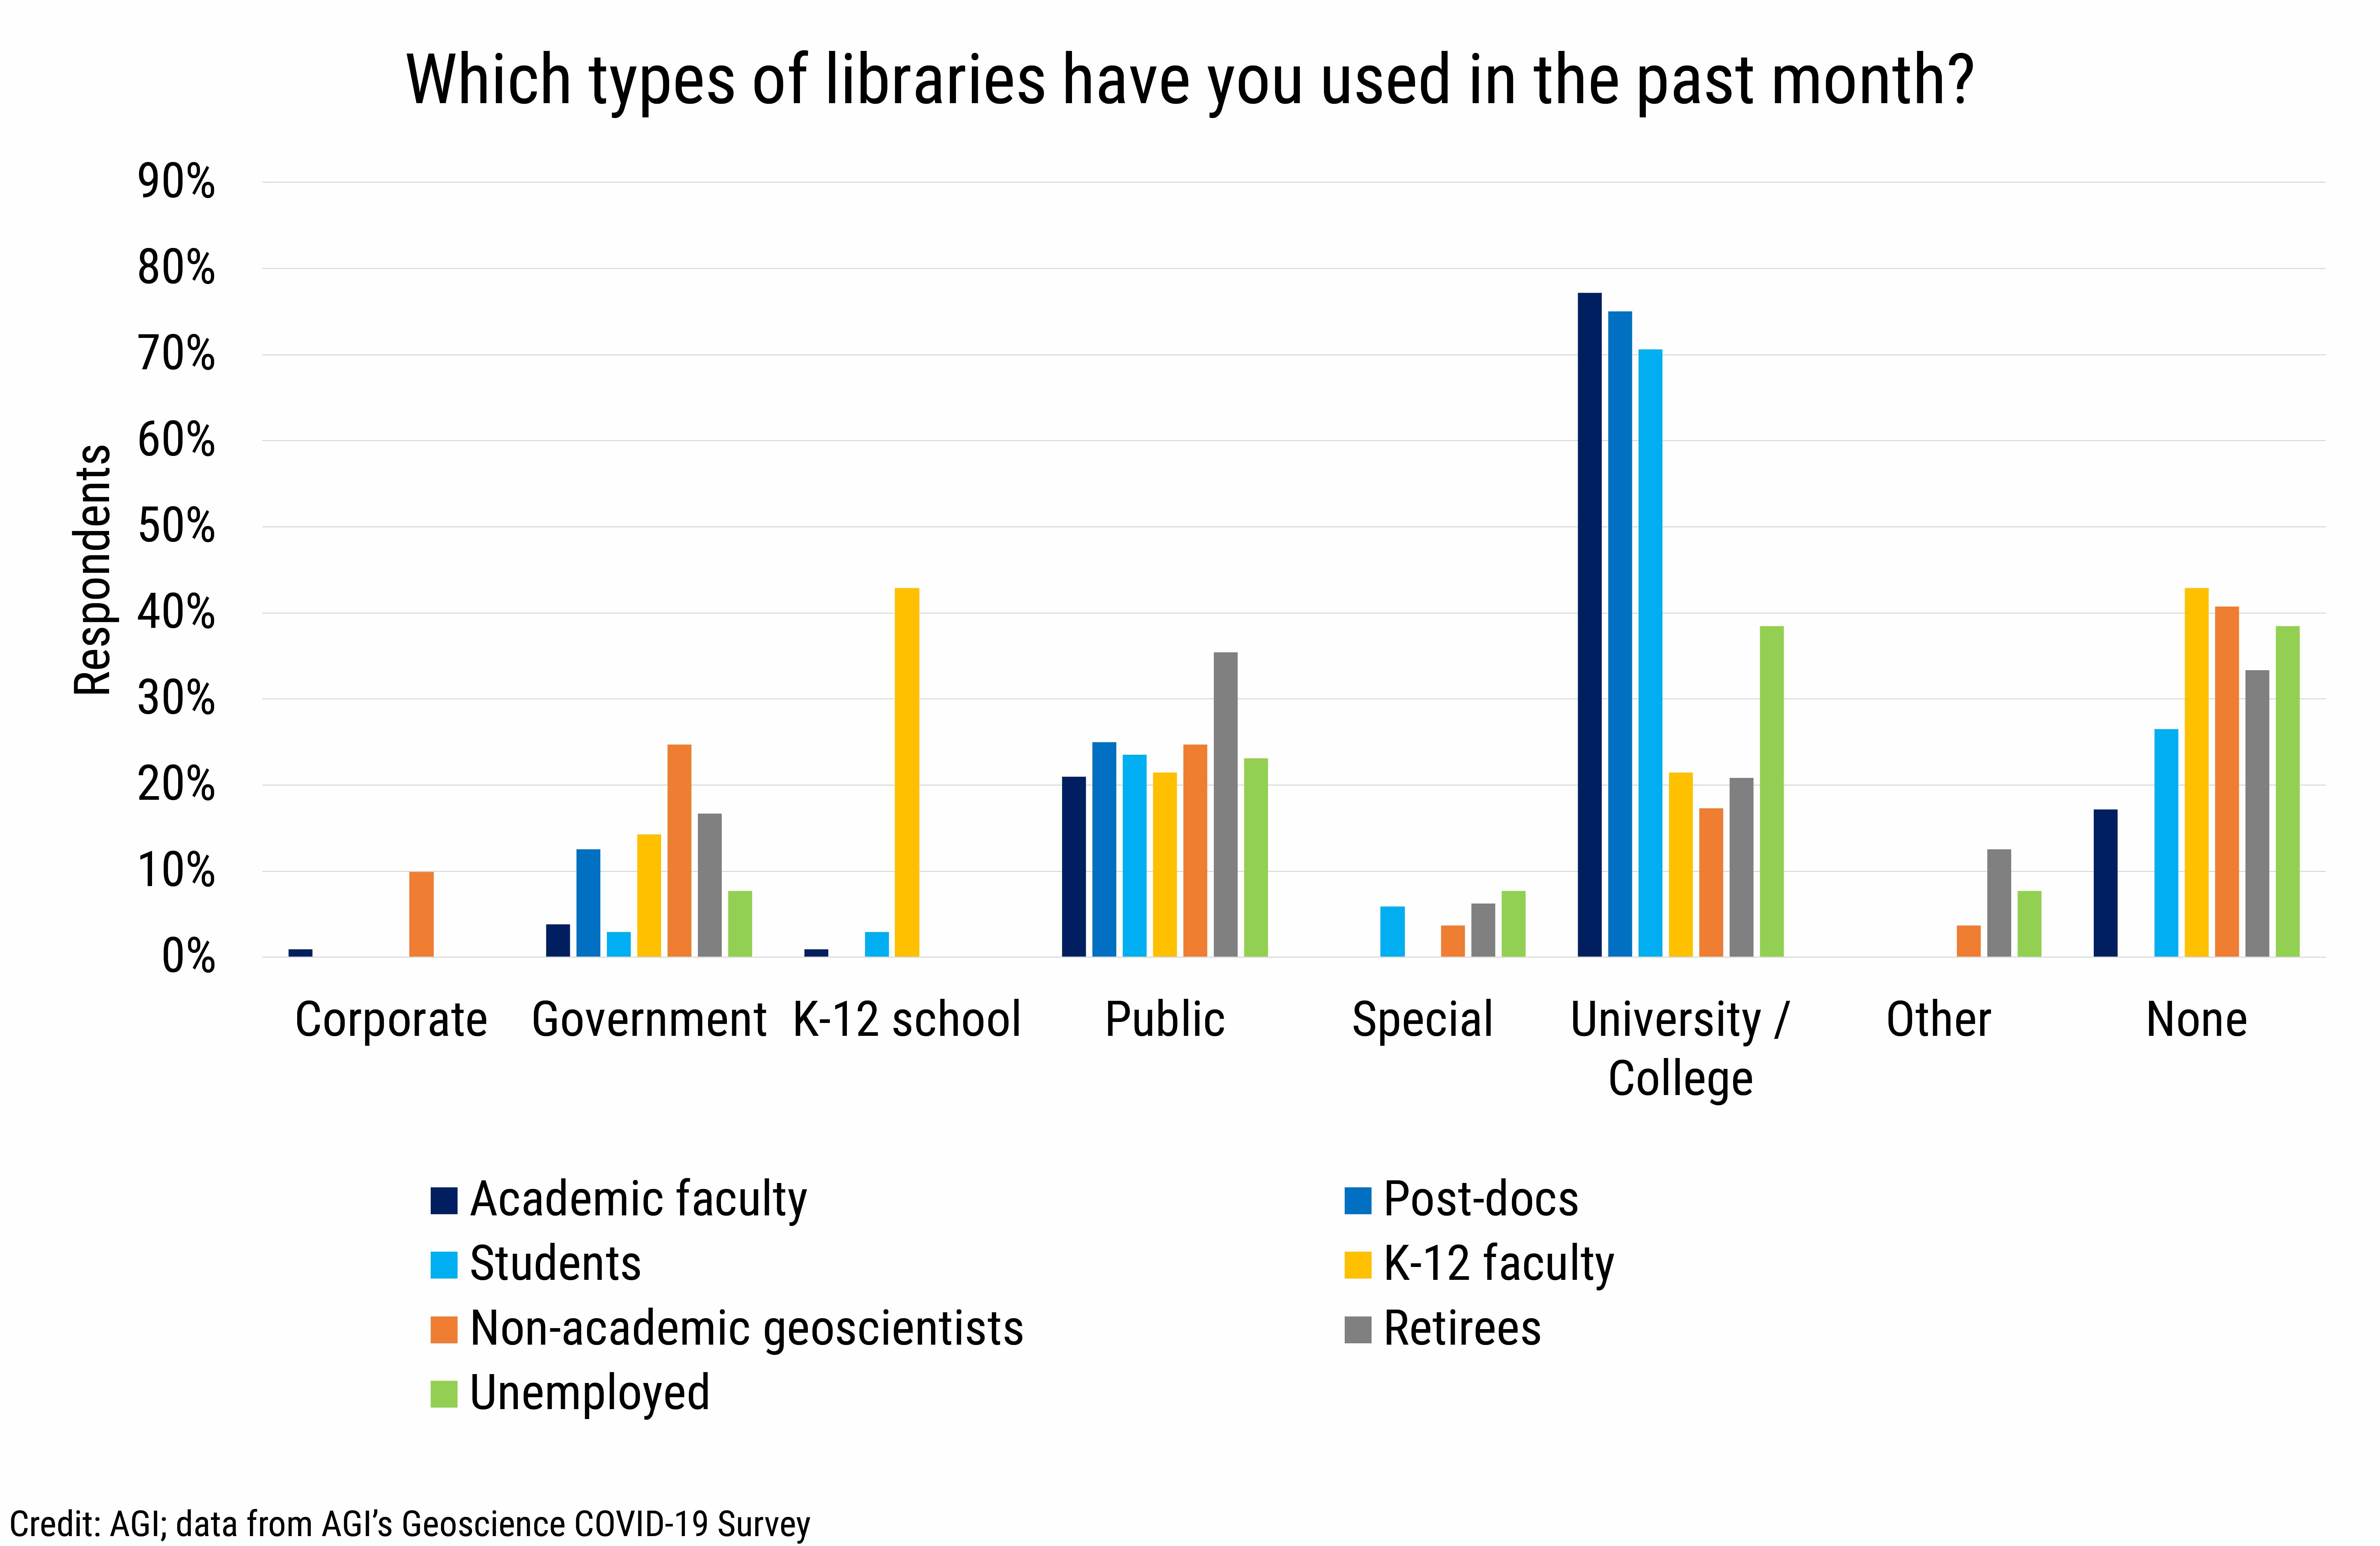 DB_2020-026 chart 01: Types of libraries used by cohort (Credit: AGI; data from AGI's Geoscience COVID-19 Survey)